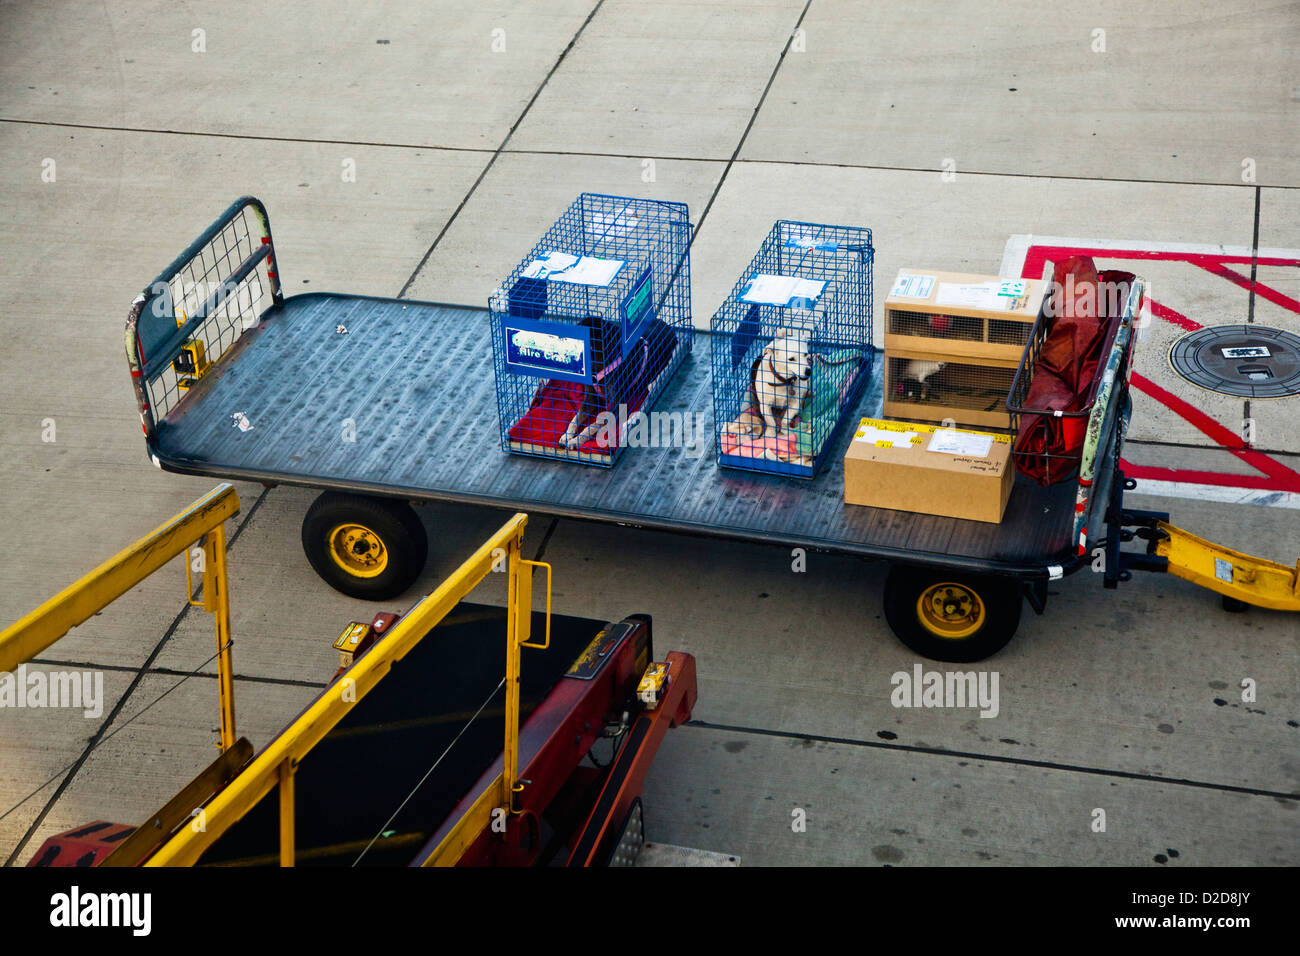 Two dogs in cages next to other luggage on a trailer at an airport Stock Photo